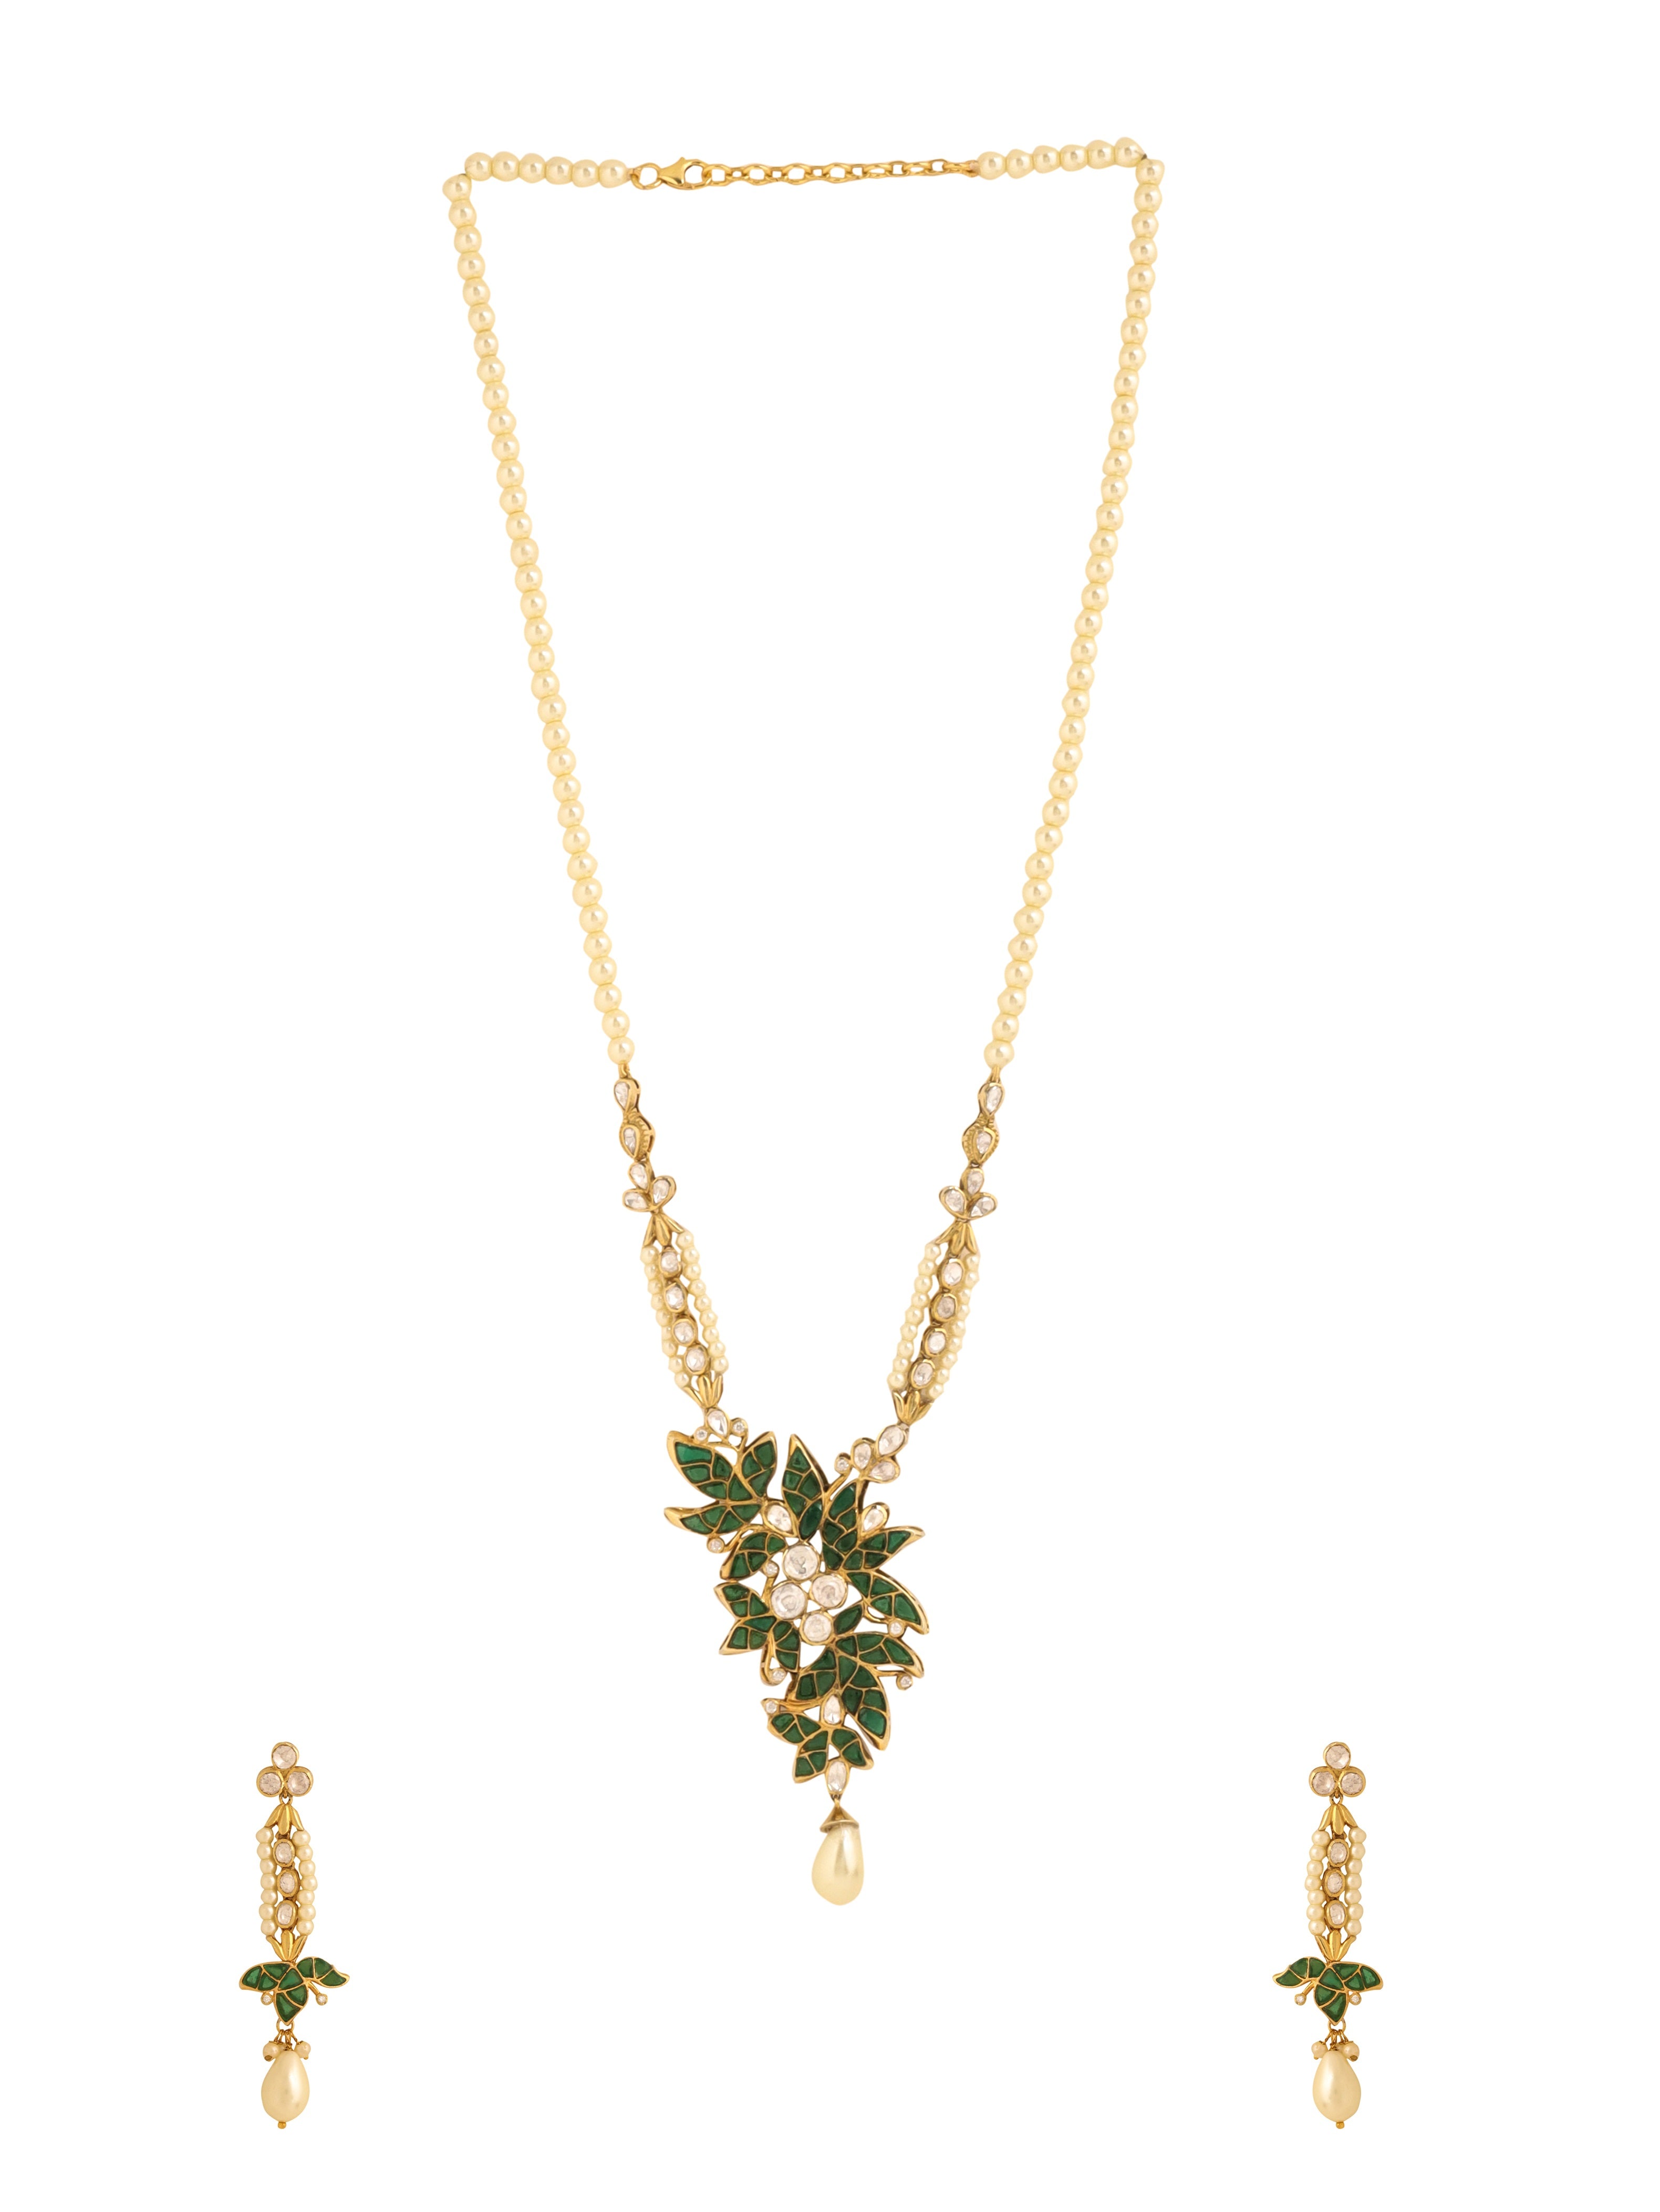 The Blooming Necklace Set